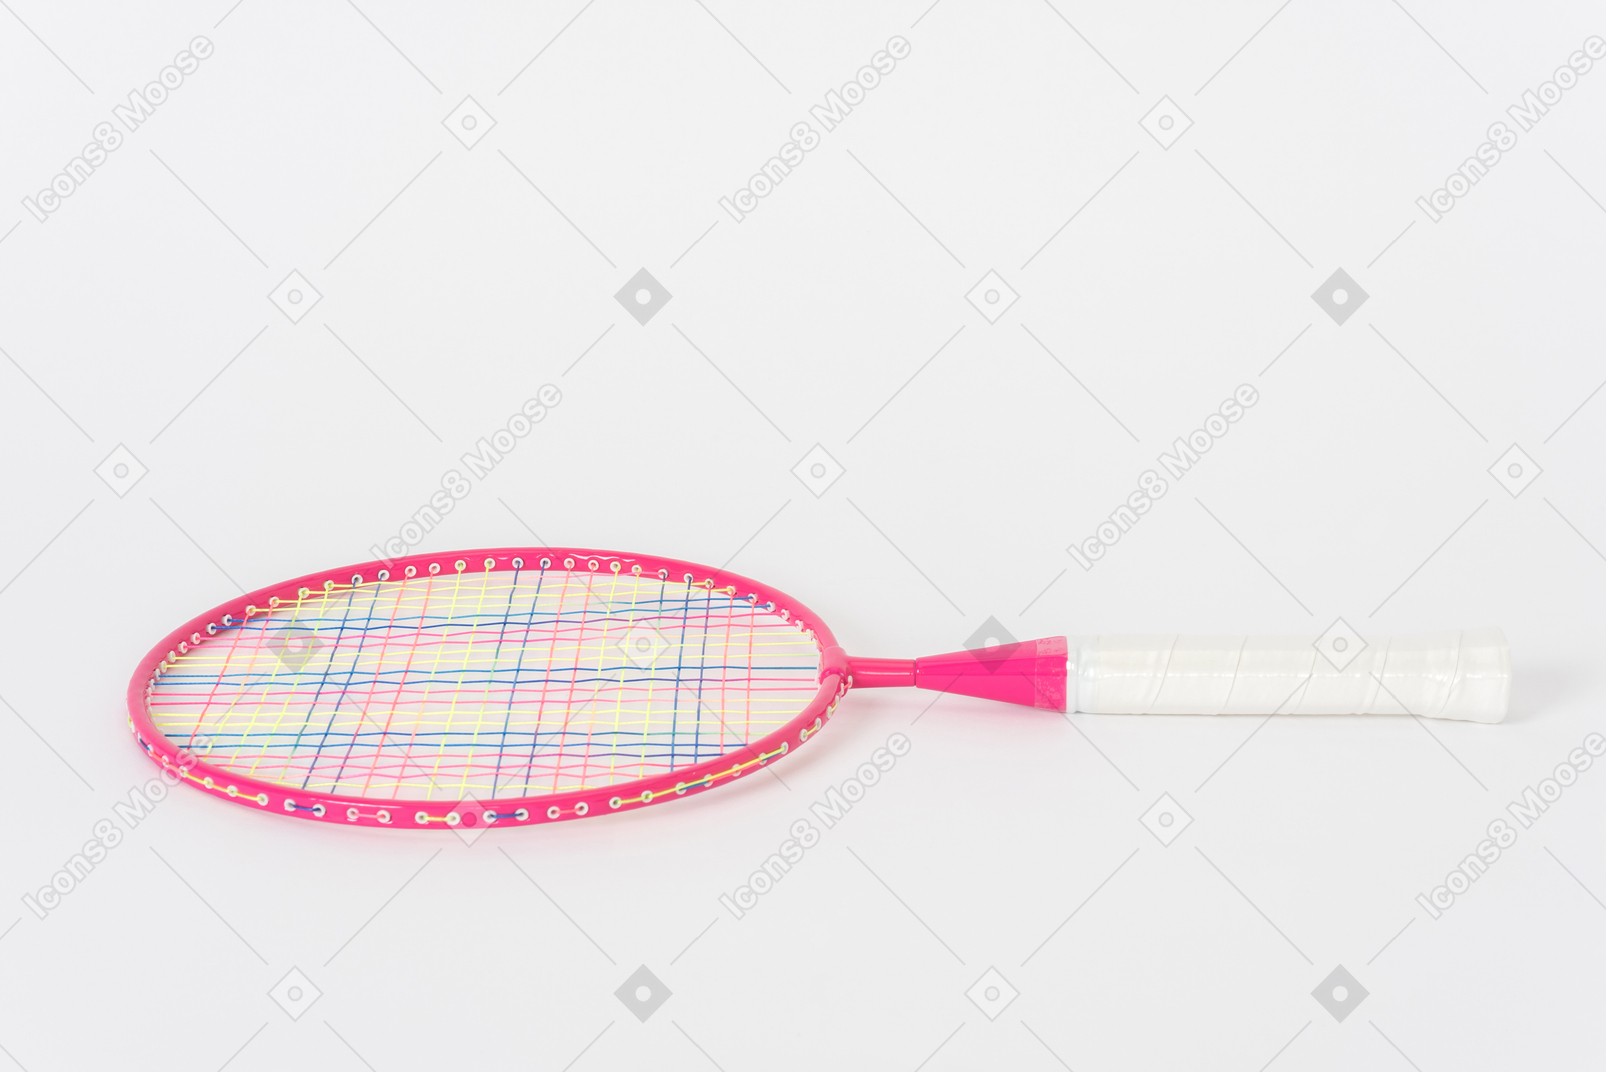 Pink tennis racket on a white background